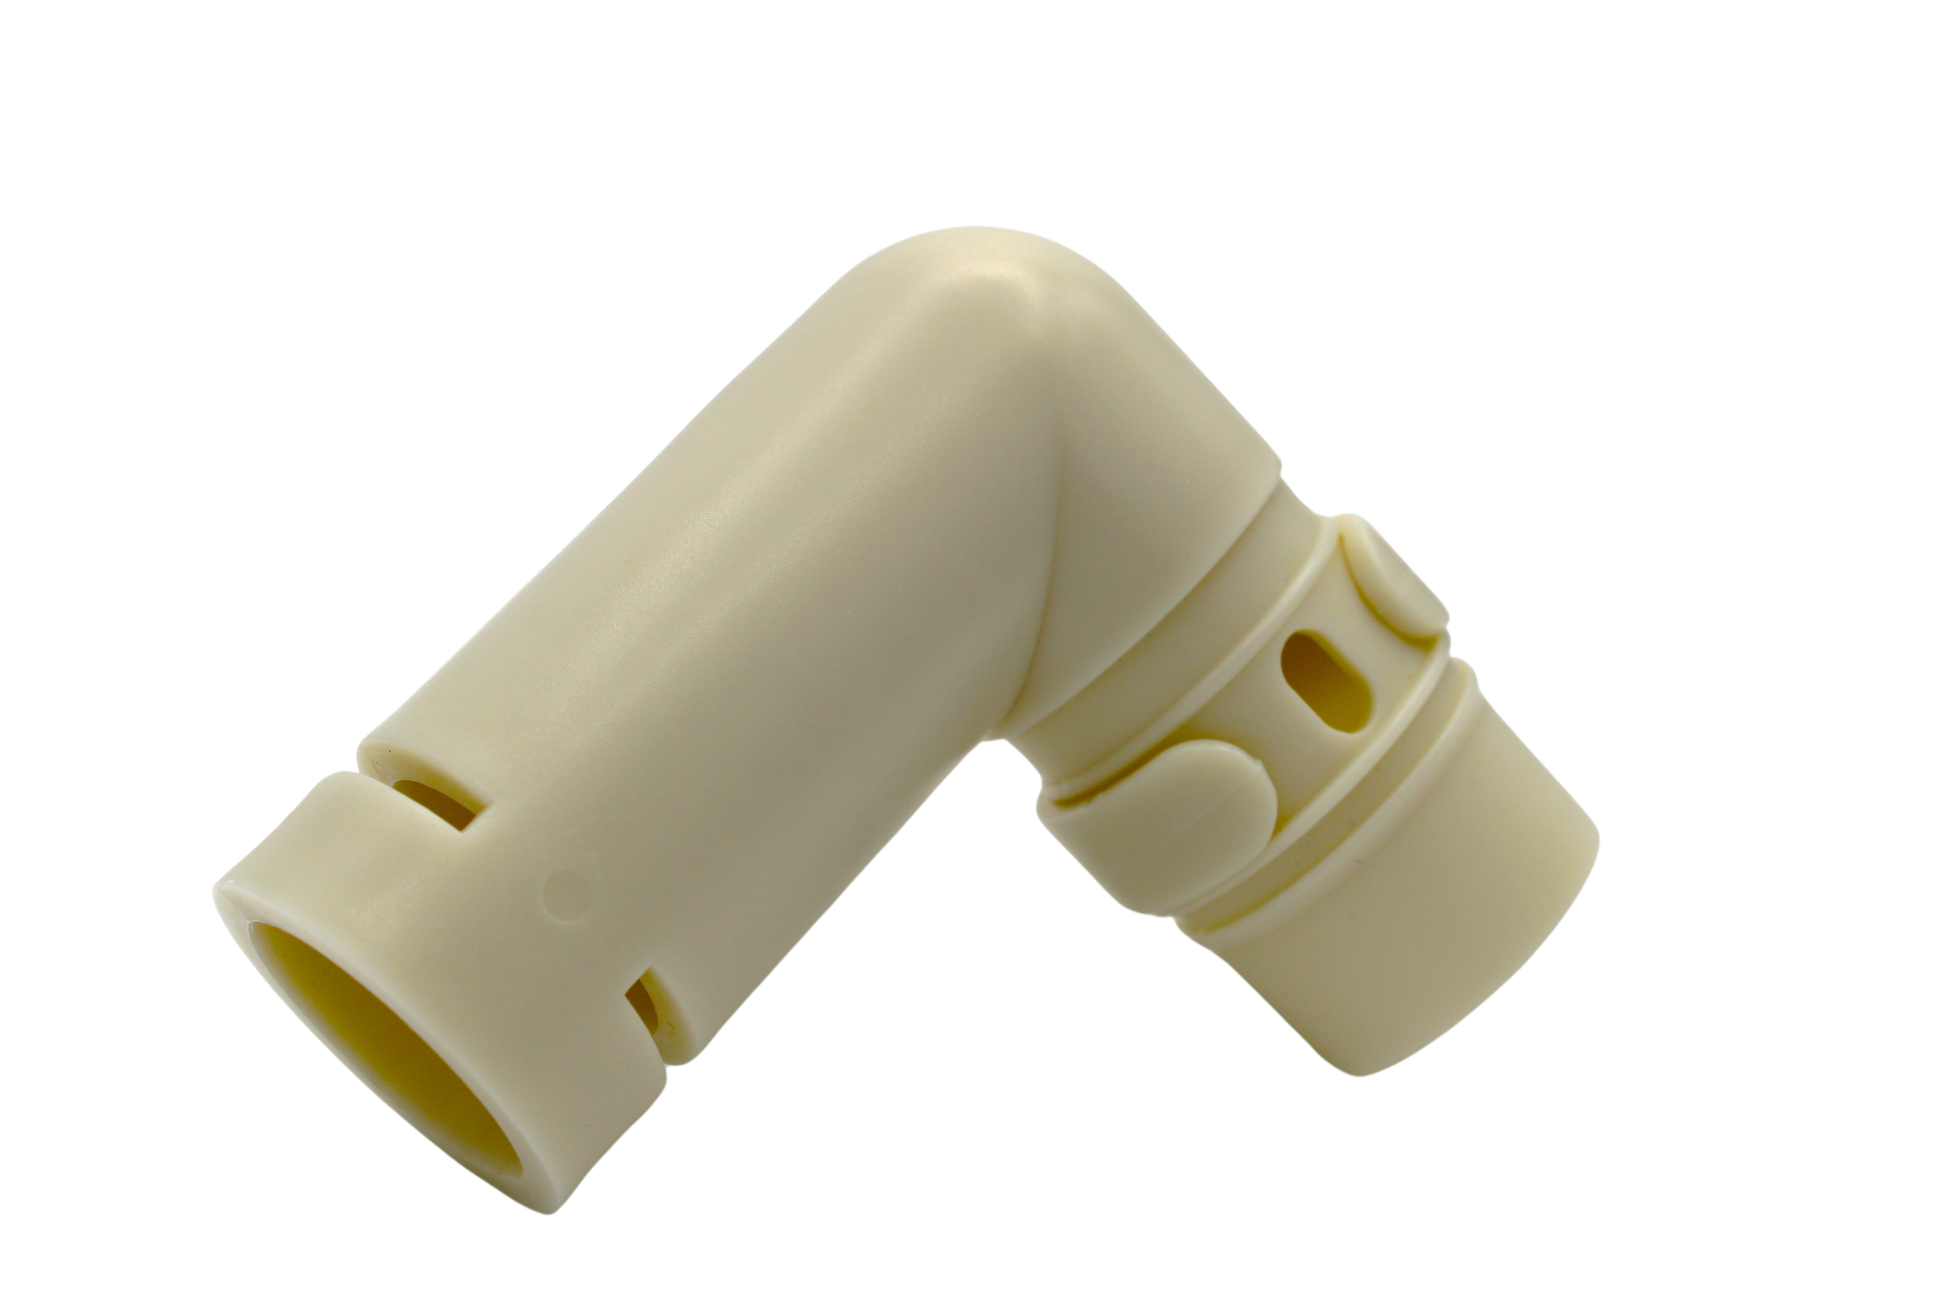 Close up of L-Connector which is used to connect you aim flow fitting to the Pooldevil Pro hose.